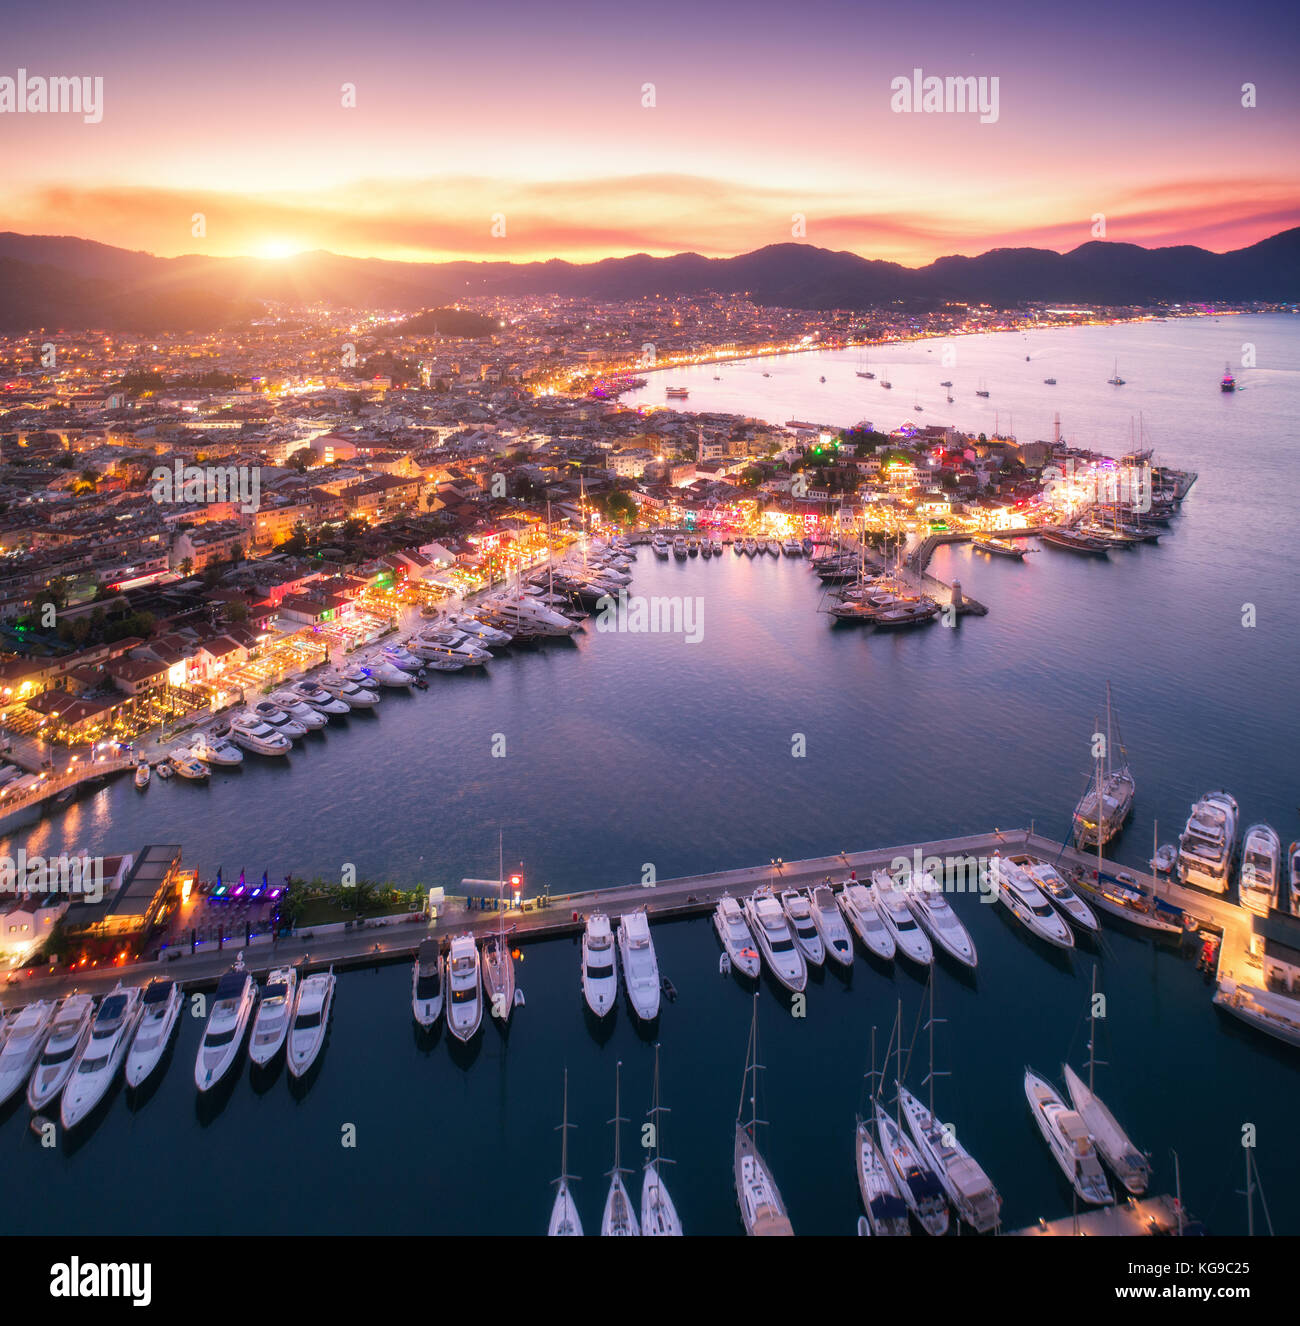 Aerial view of boats and beautiful city at sunset in Marmaris, Turkey. Amazing landscape with boats in marina bay, sea, city lights, mountains, sky, c Stock Photo